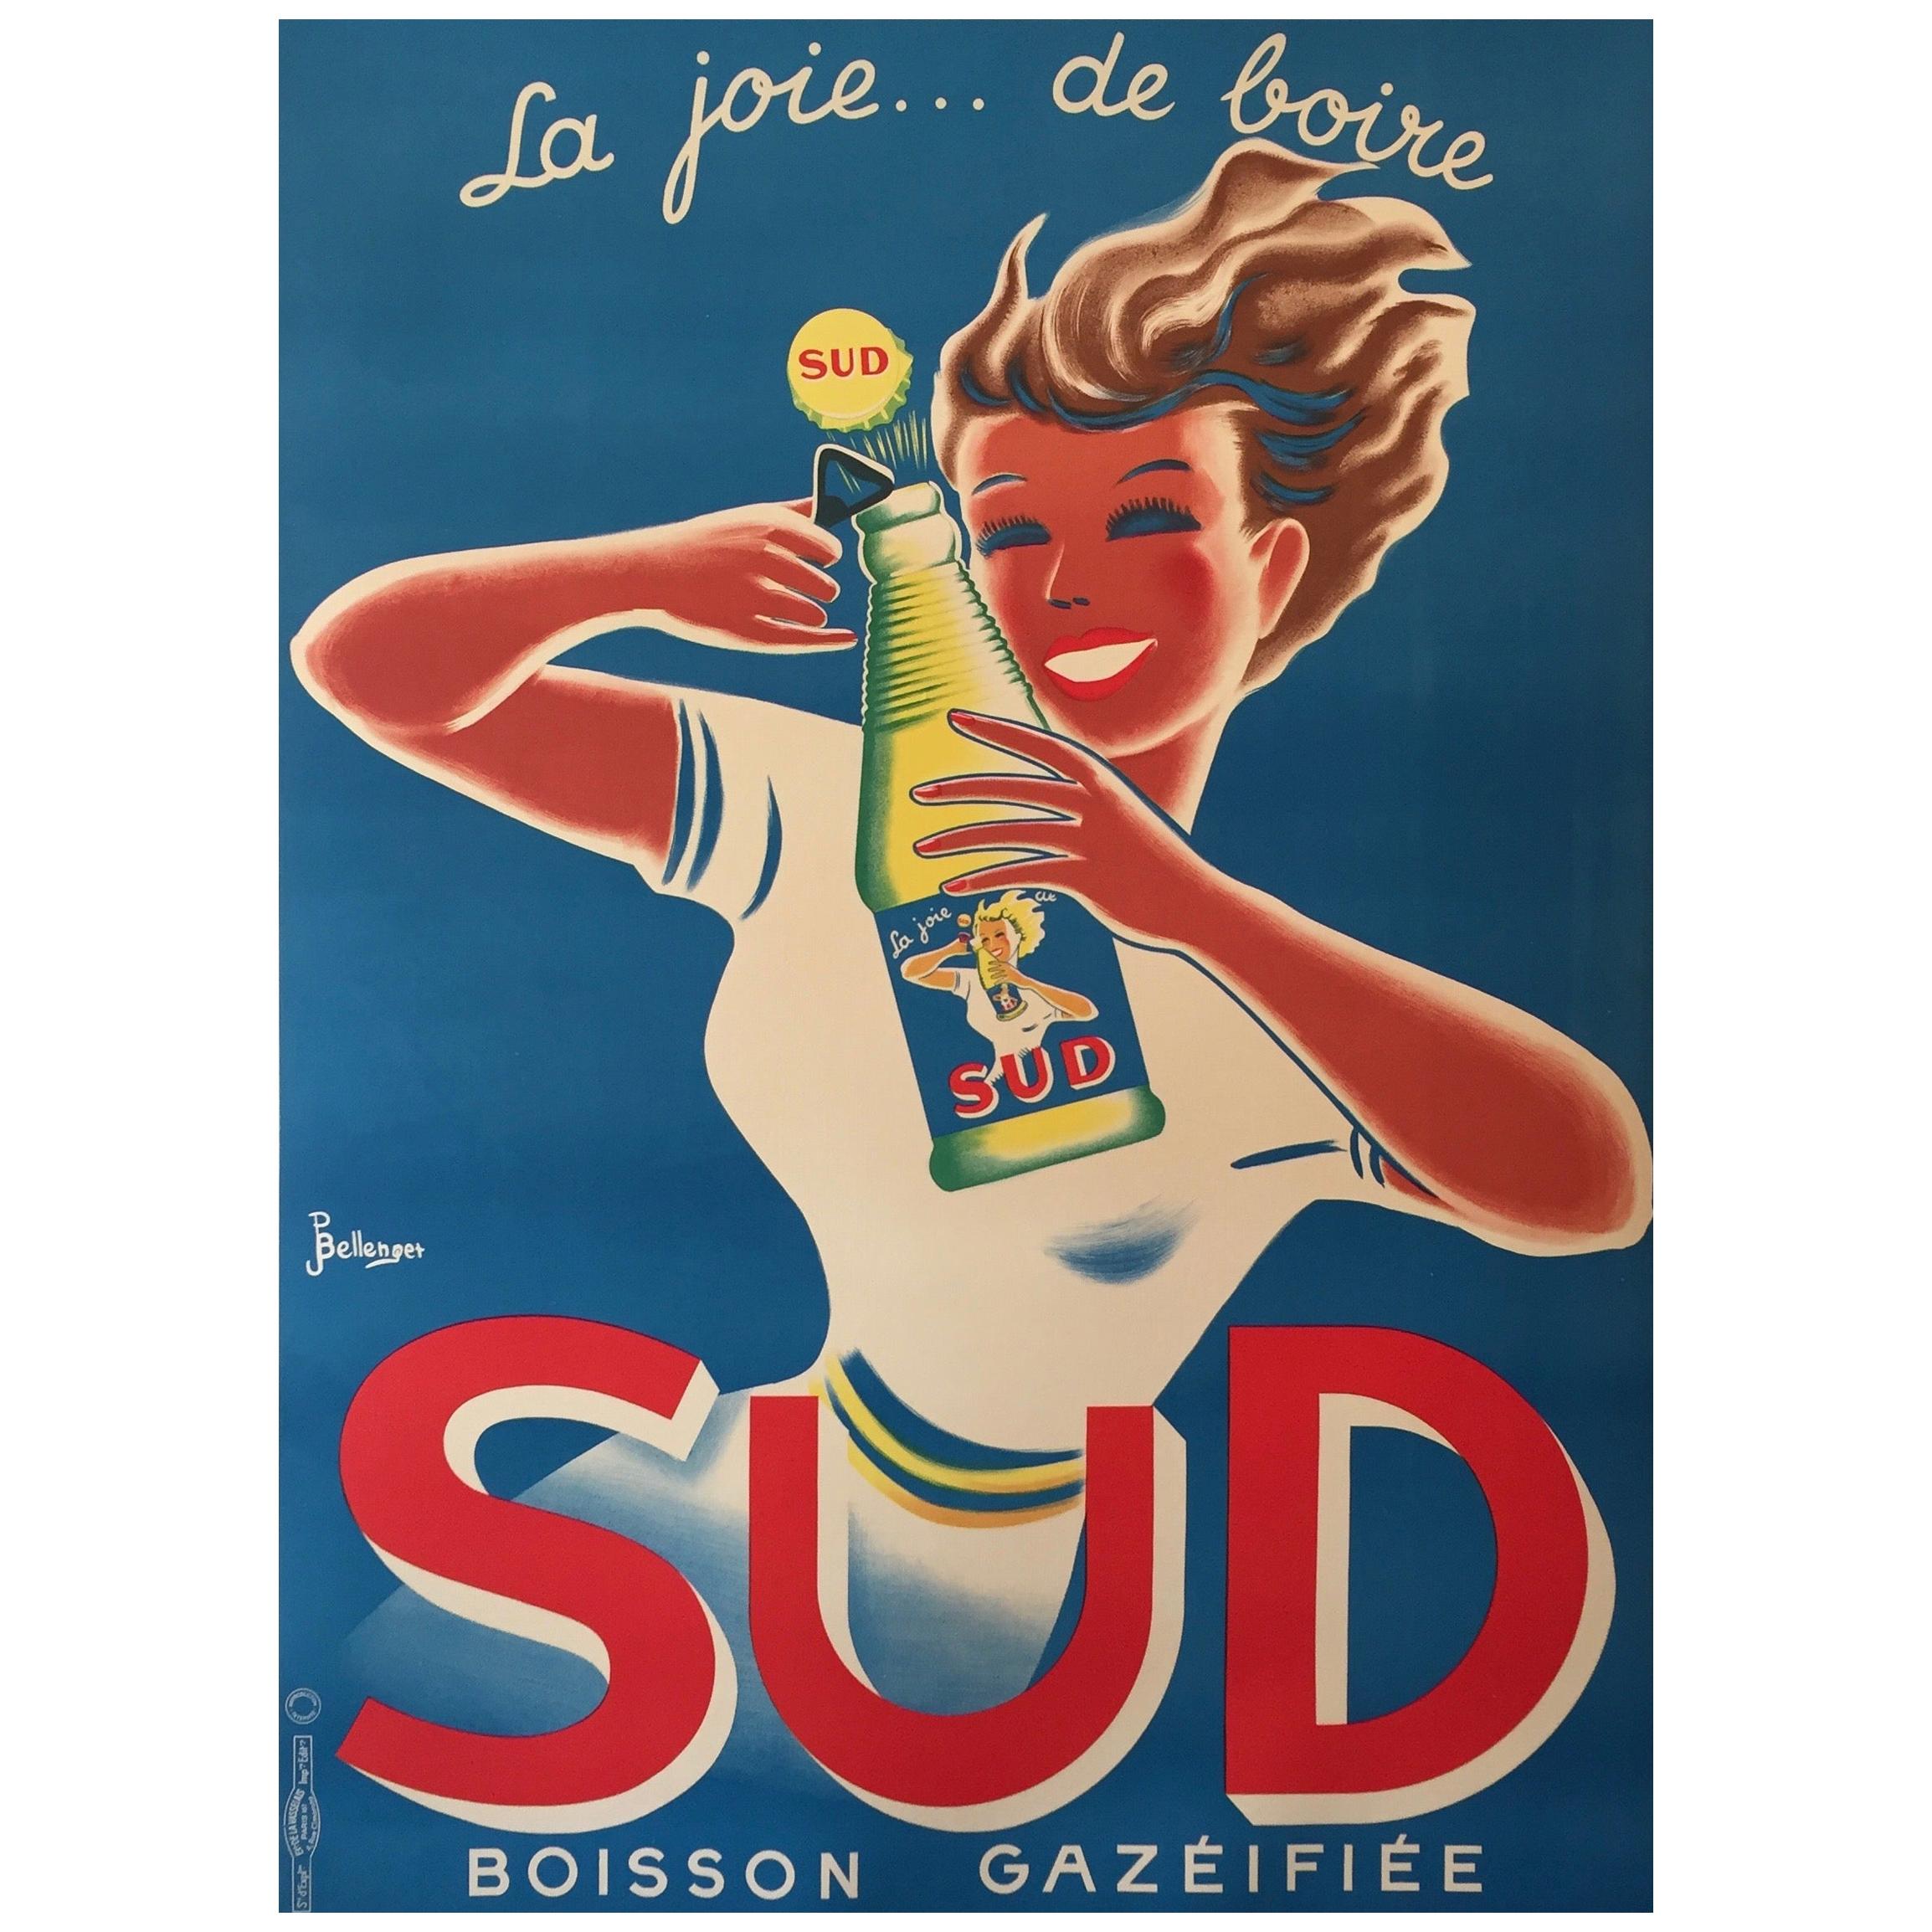 Art Deco Original Vintage French Lithograph Poster, 'SUD' by Bellenger, 1940